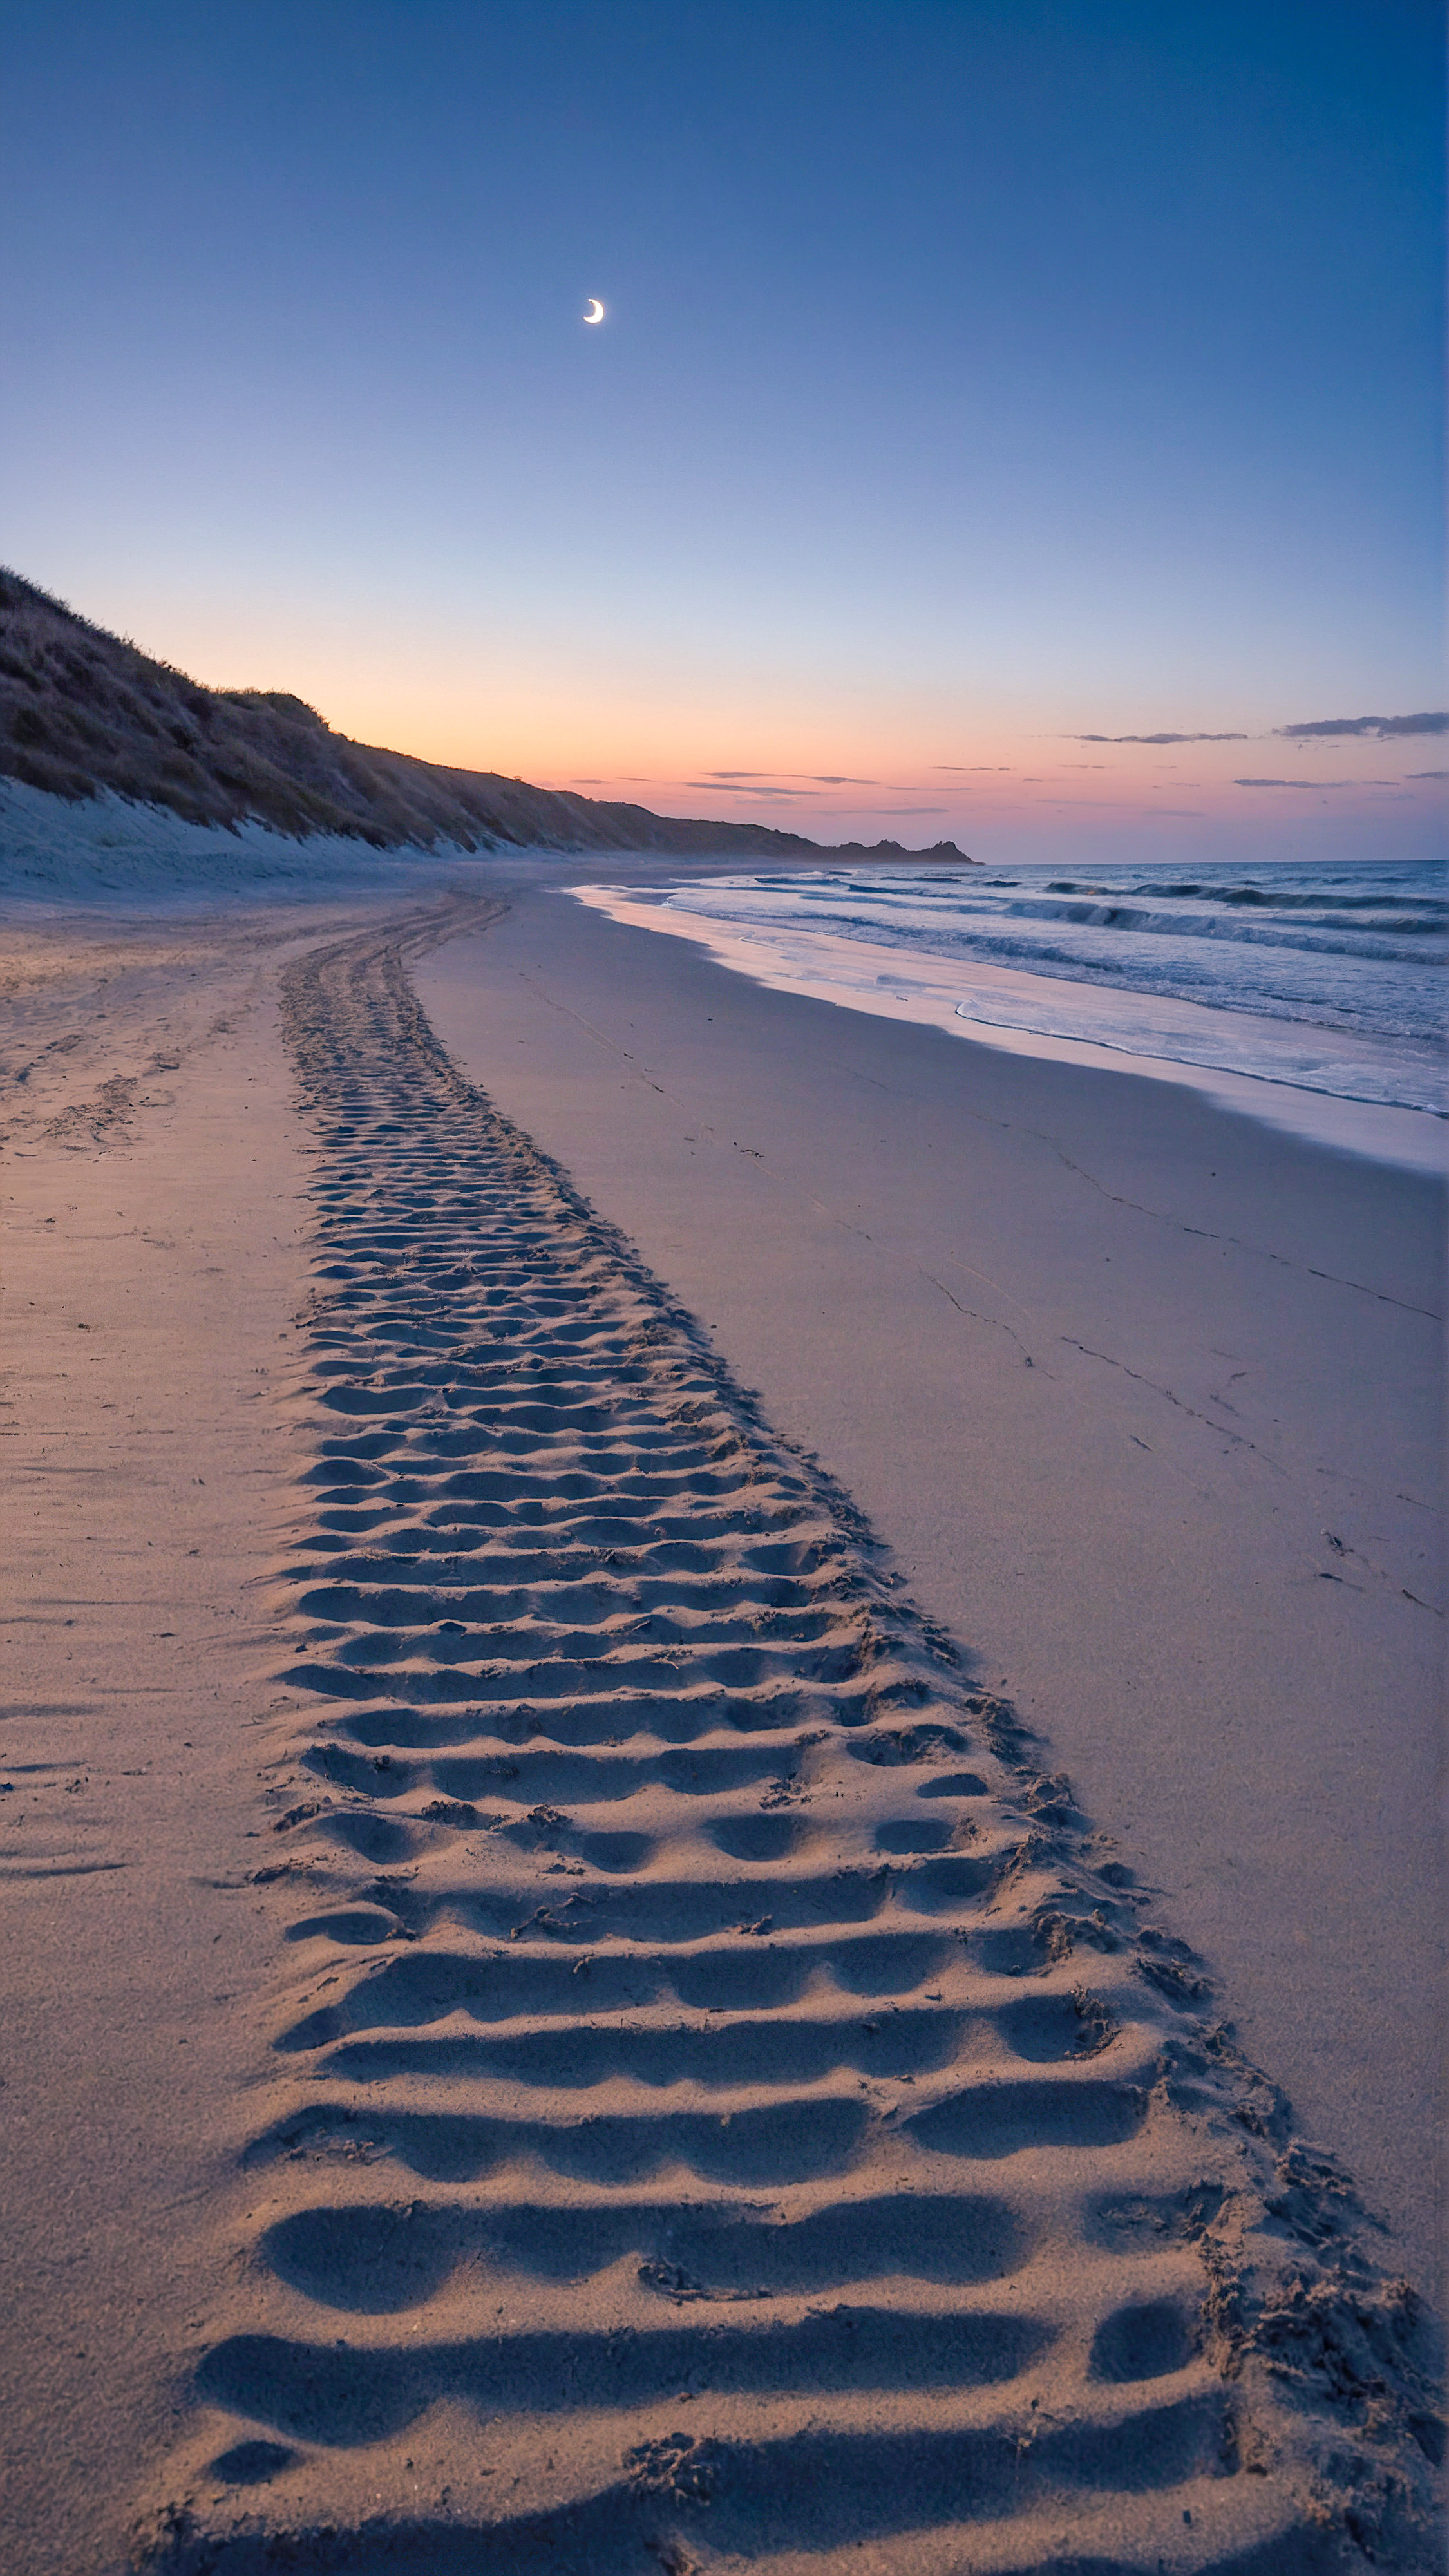 Get lost in the magic of a serene beach scene at dusk, with tire tracks in the sand leading towards the gentle waves, and a crescent moon visible in the sky with our aesthetic beach wallpaper for iPhone.